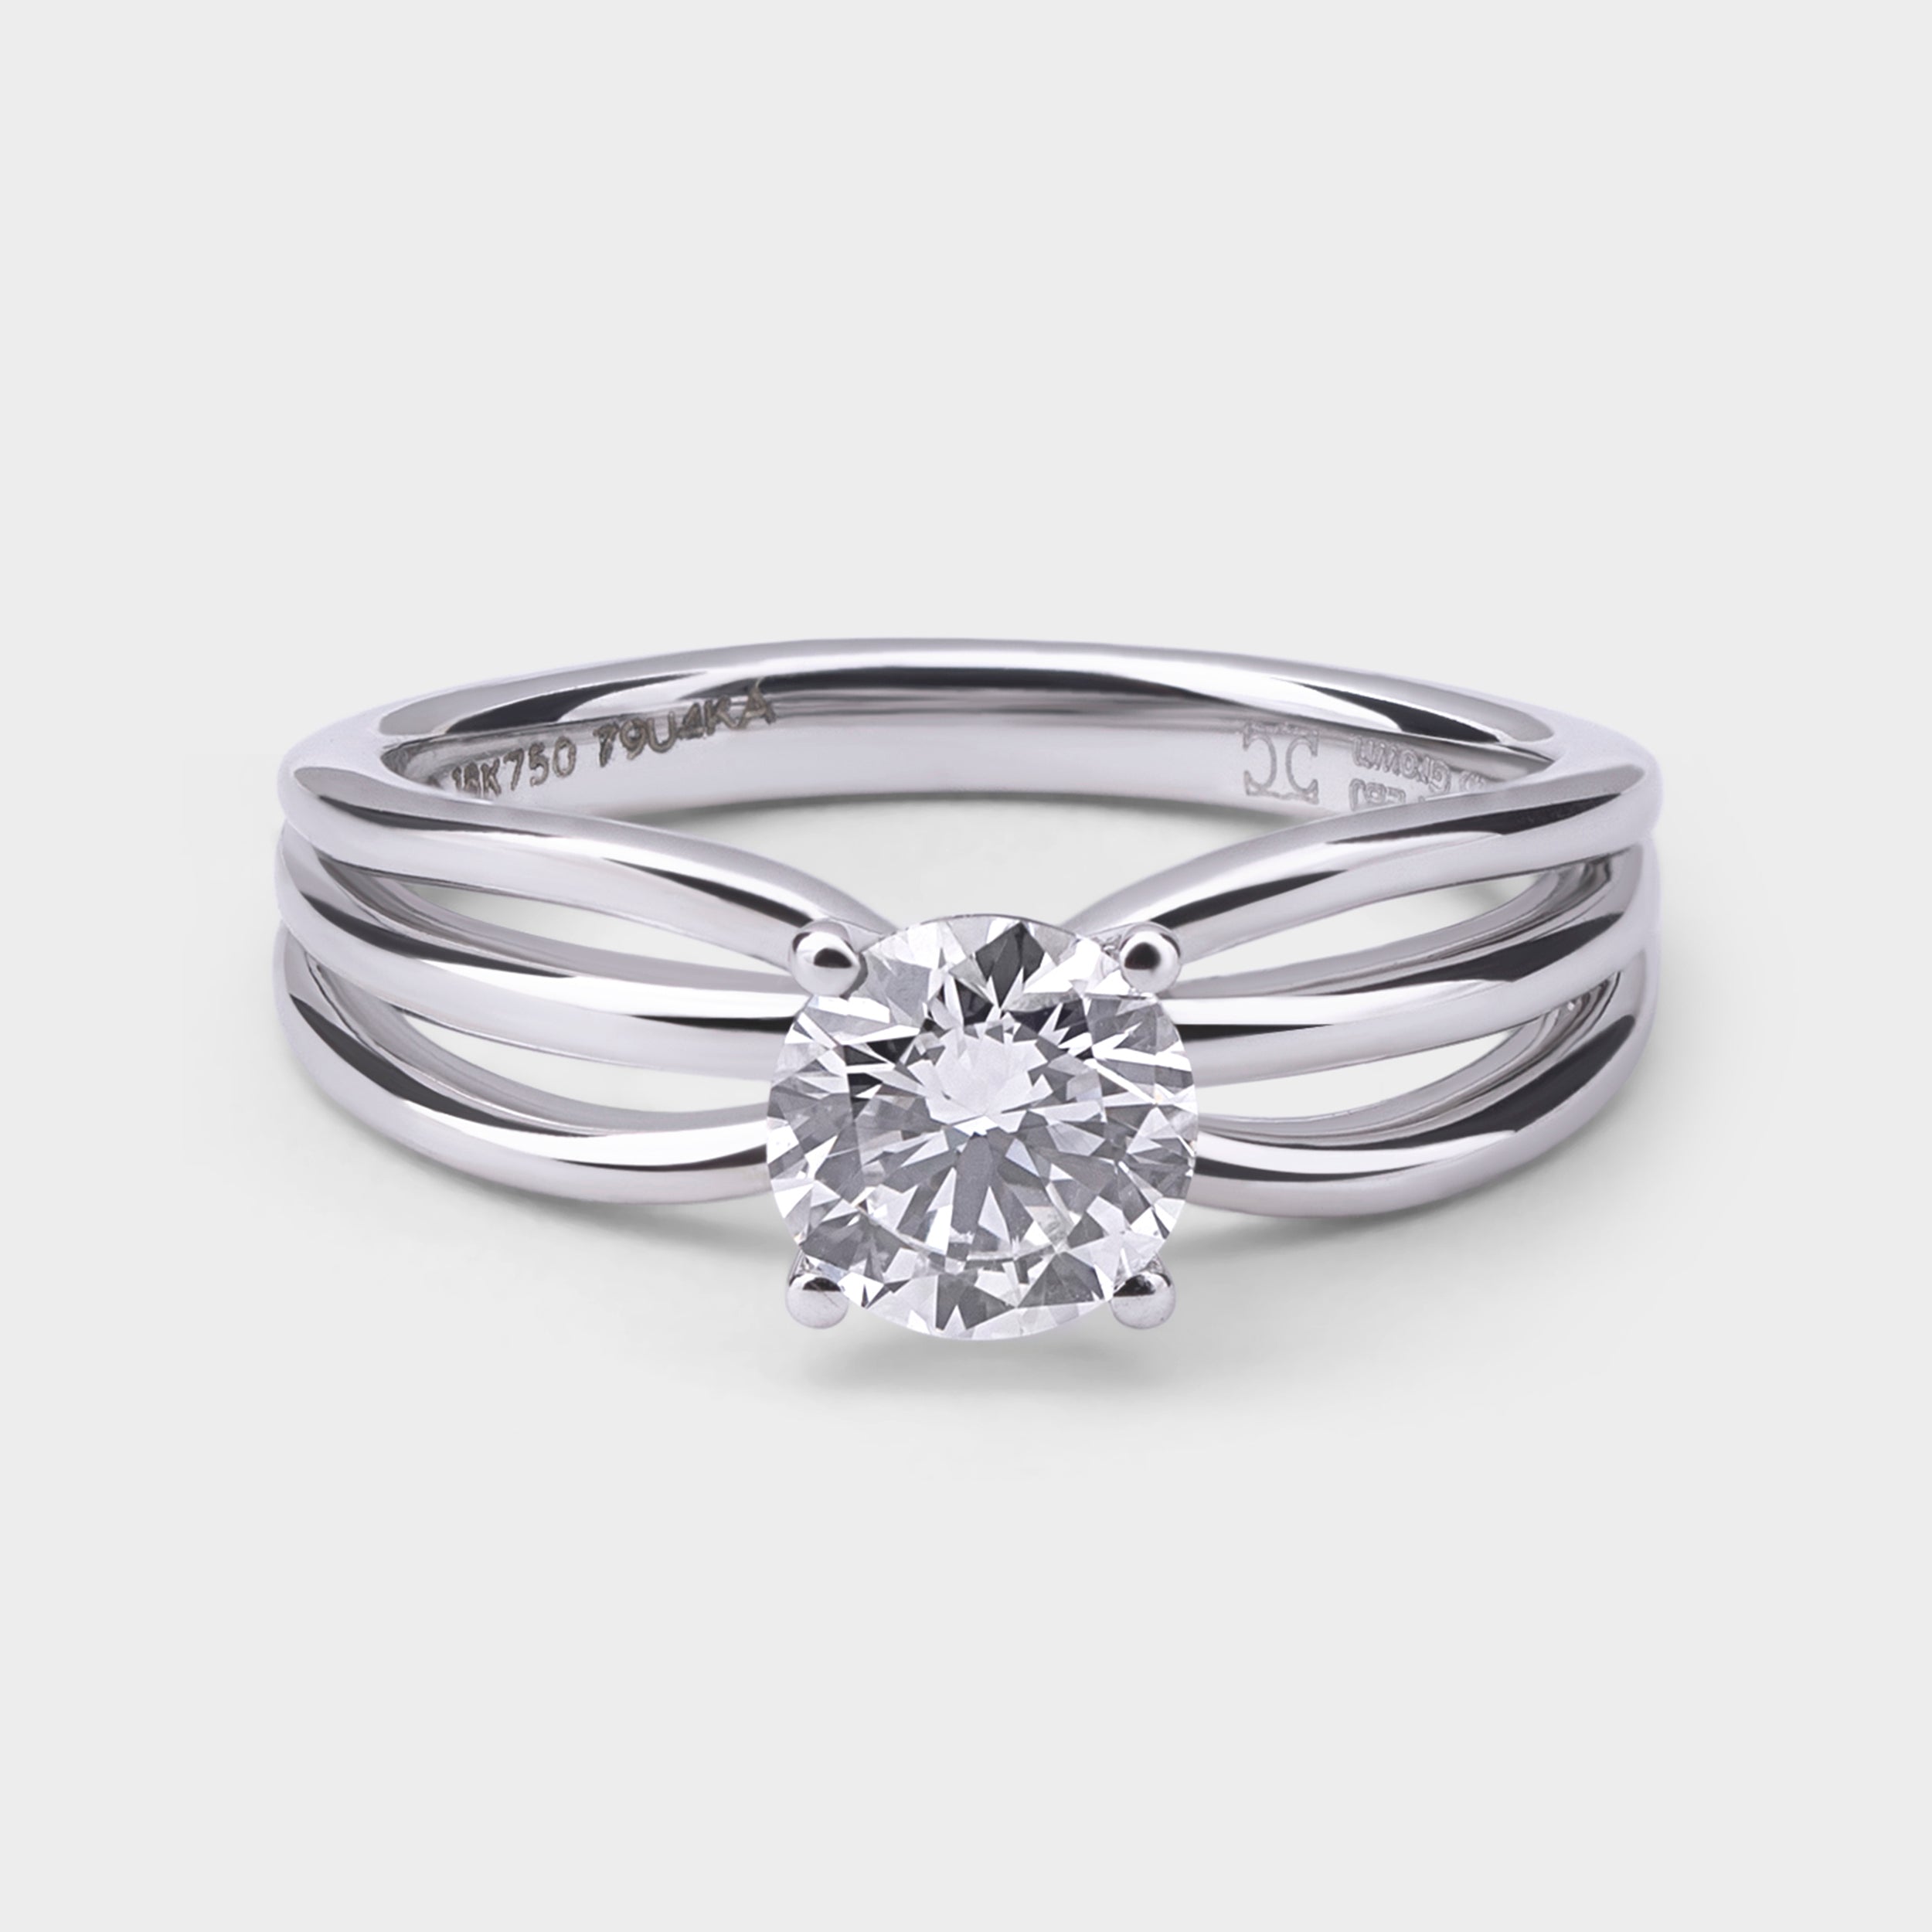 Pure Radiance: White Gold Solitaire Lab-Grown Diamond Ring | SKU : 0019853871